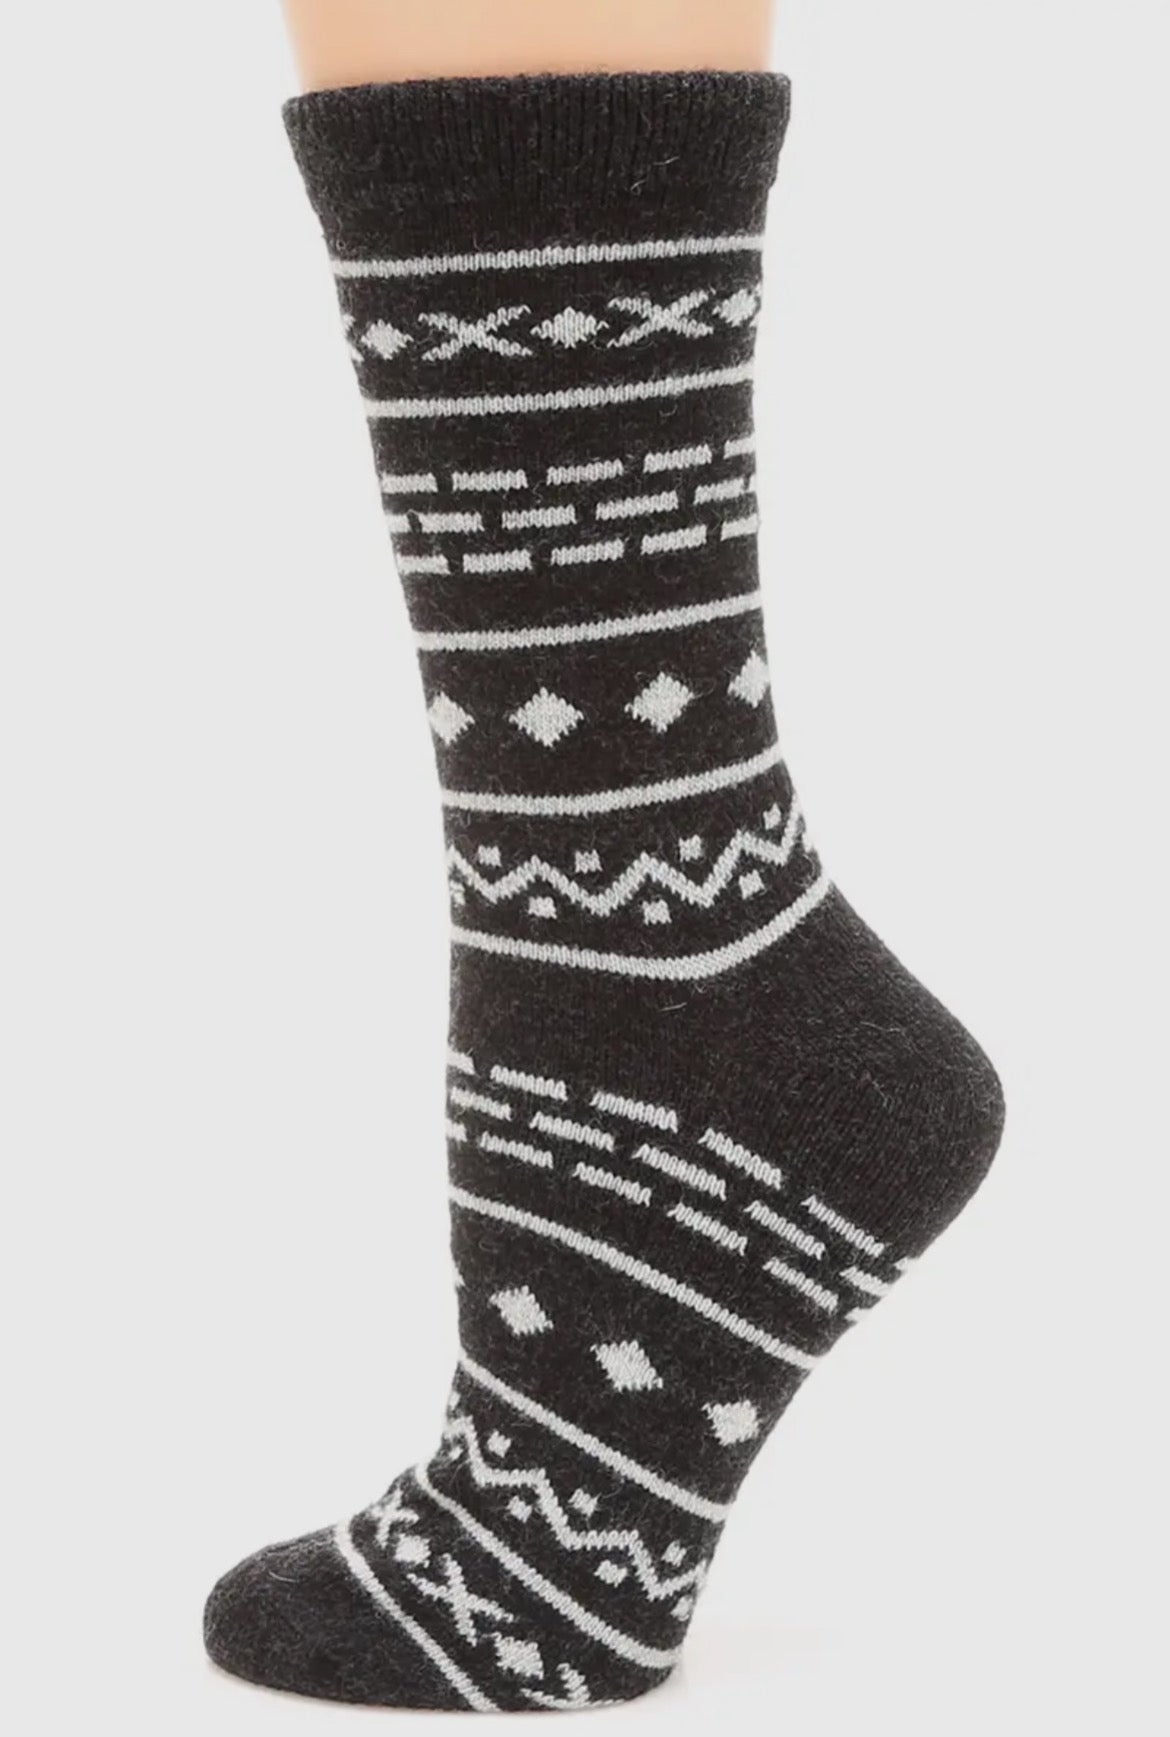 Wool Socks - Imperfectly Perfect Boutique